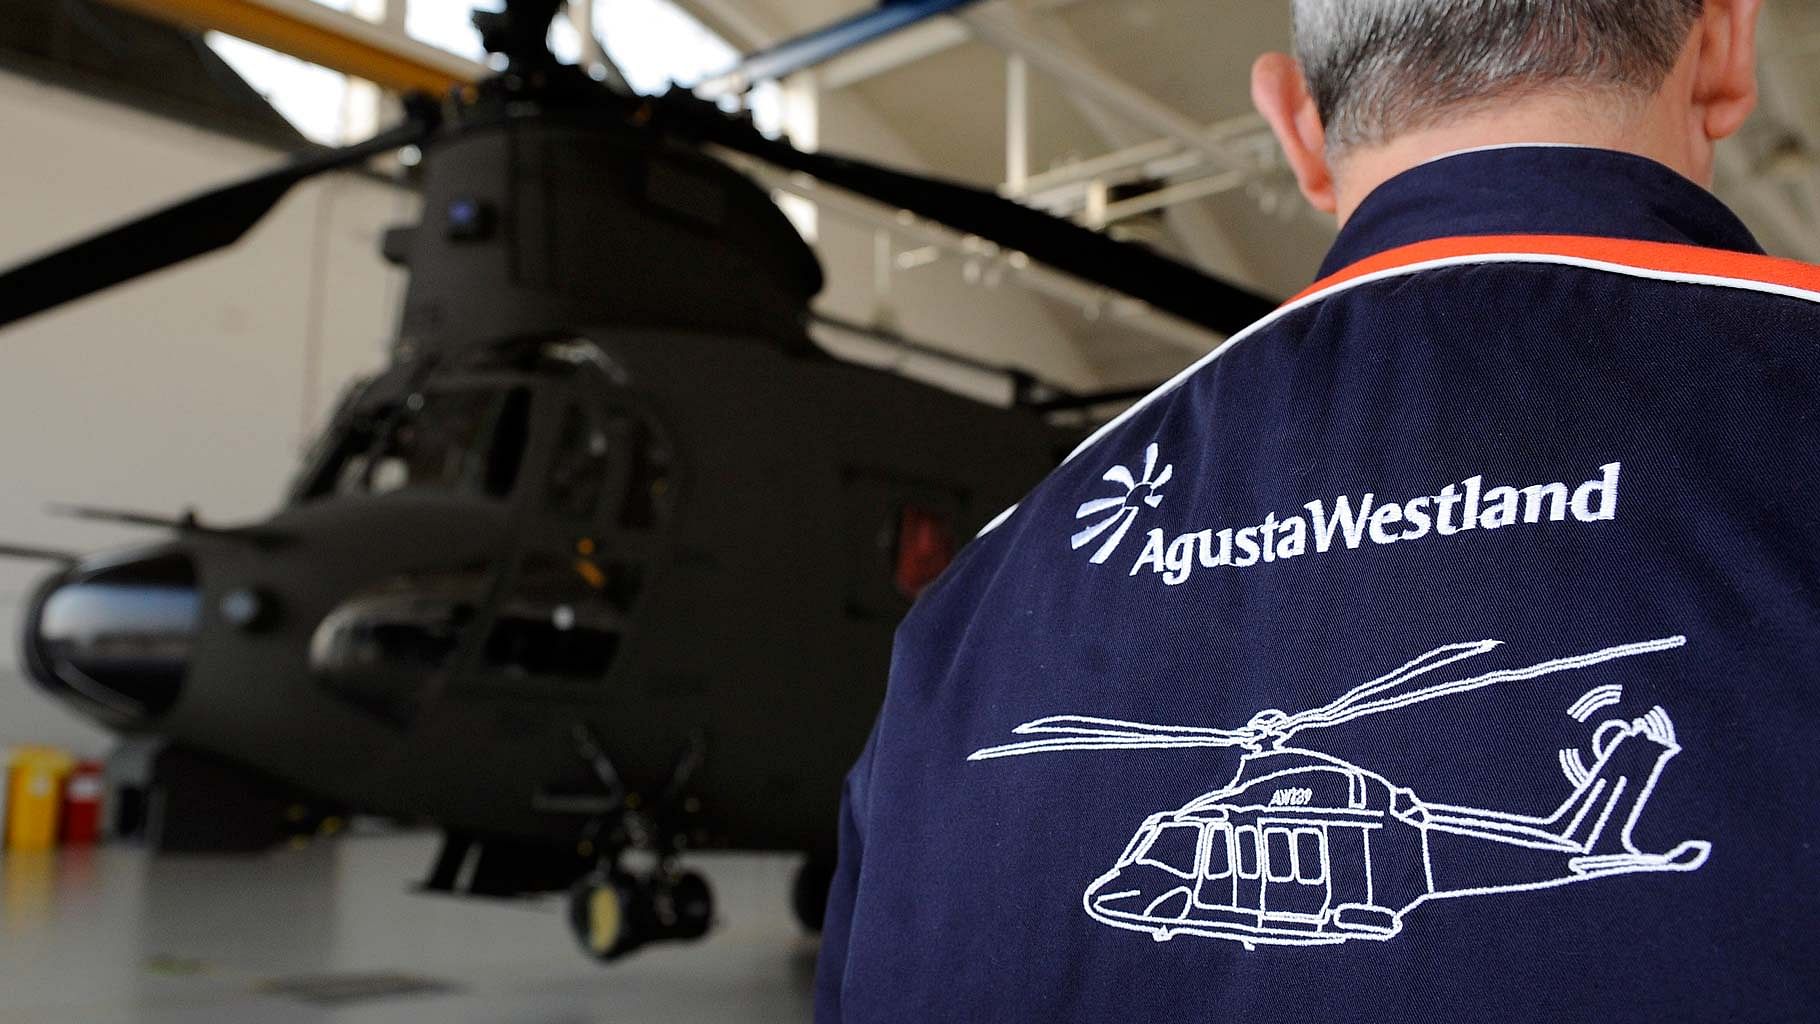 AgustaWestland reportedly paid bribes to top Congress leaders to bag a Rs 3,600 crore deal. (Photo: Reuters)